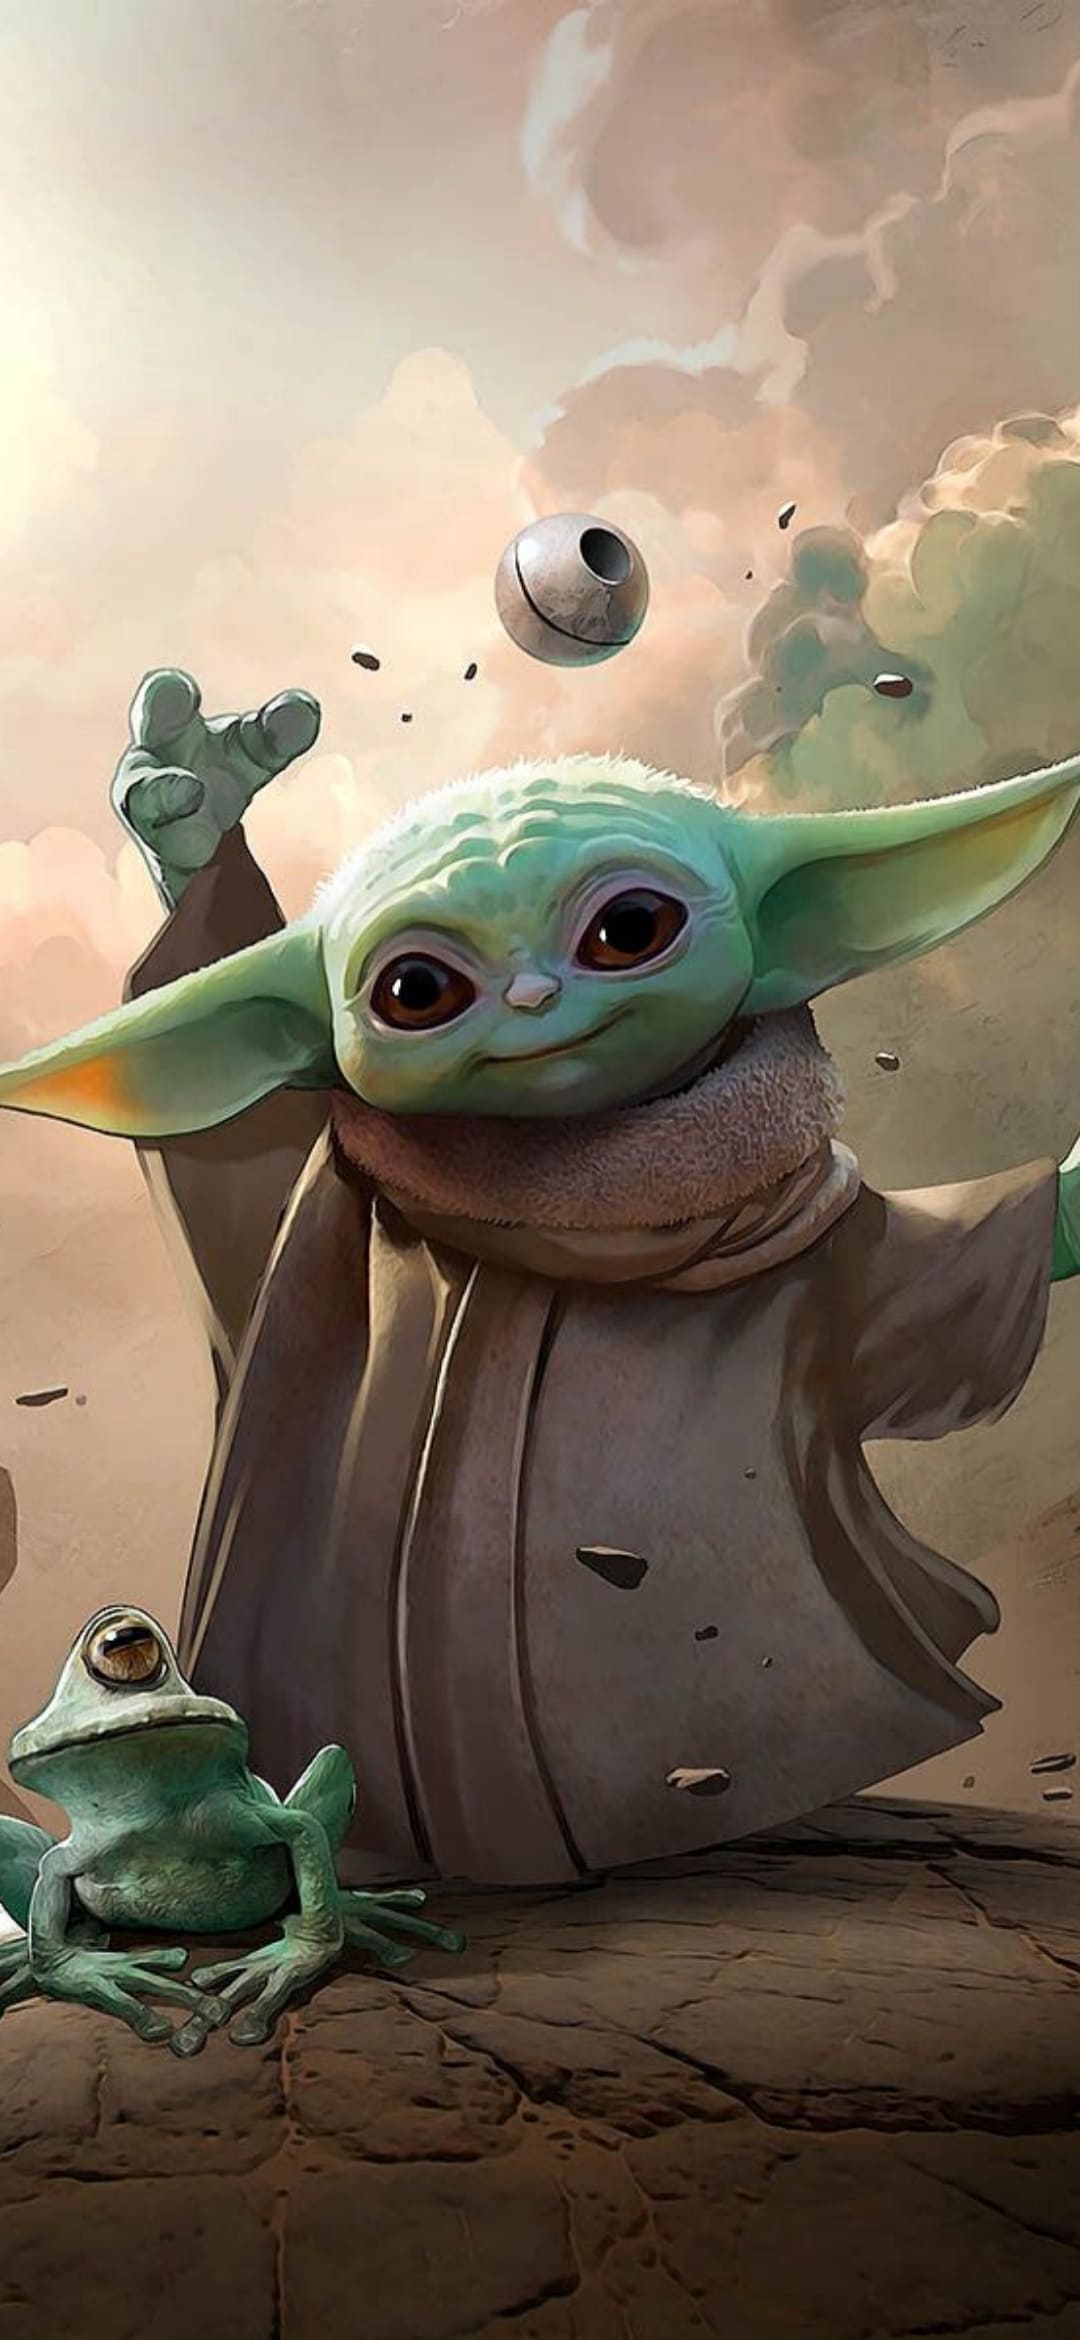 Top 65 Baby Yoda Wallpapers   Getty Wallpapers 1080x2340